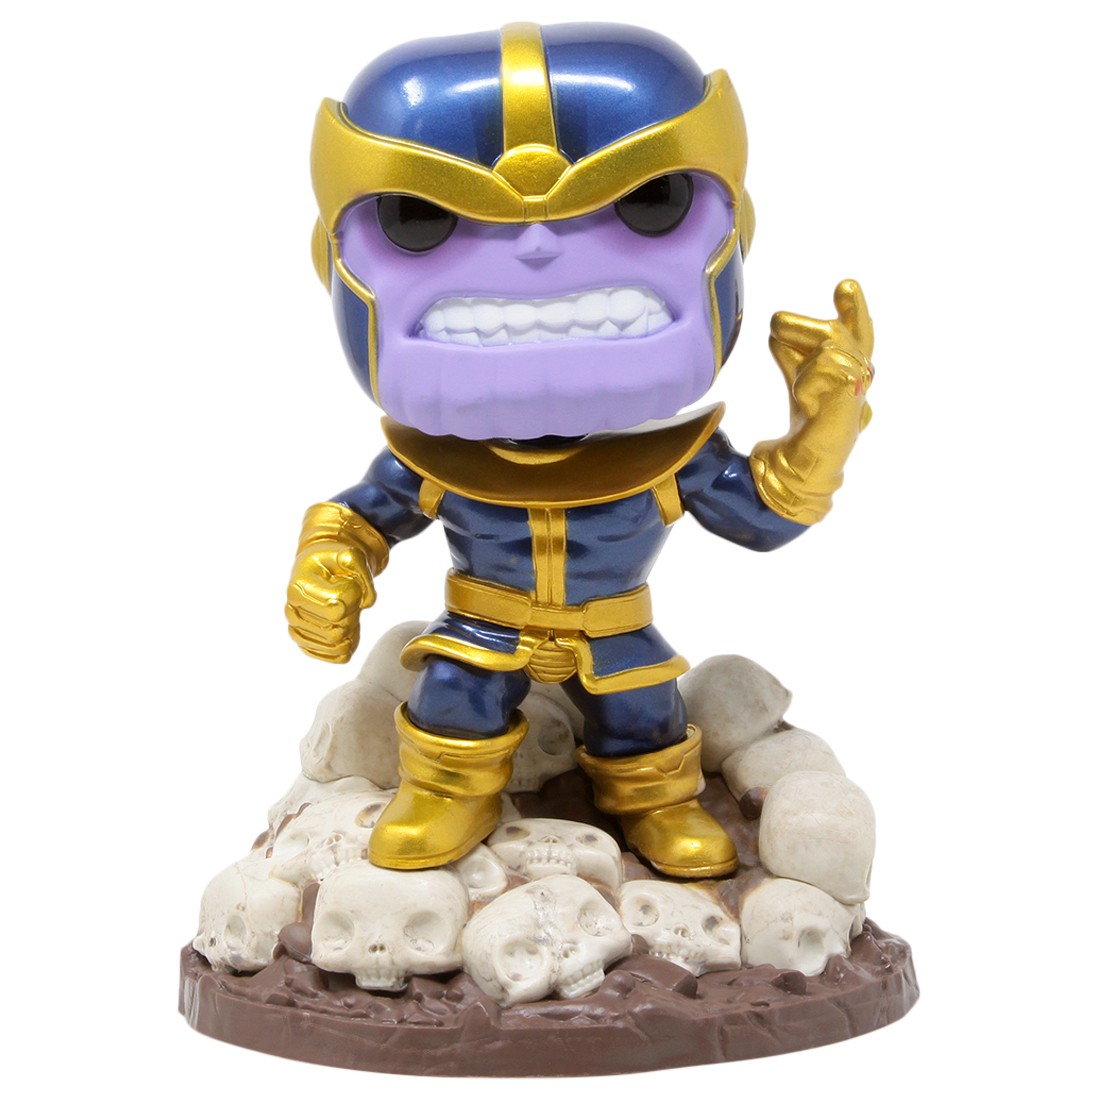 Funko POP Marvel Heroes 6 Inch Thanos Snap - PX Previews Exclusive (purple)